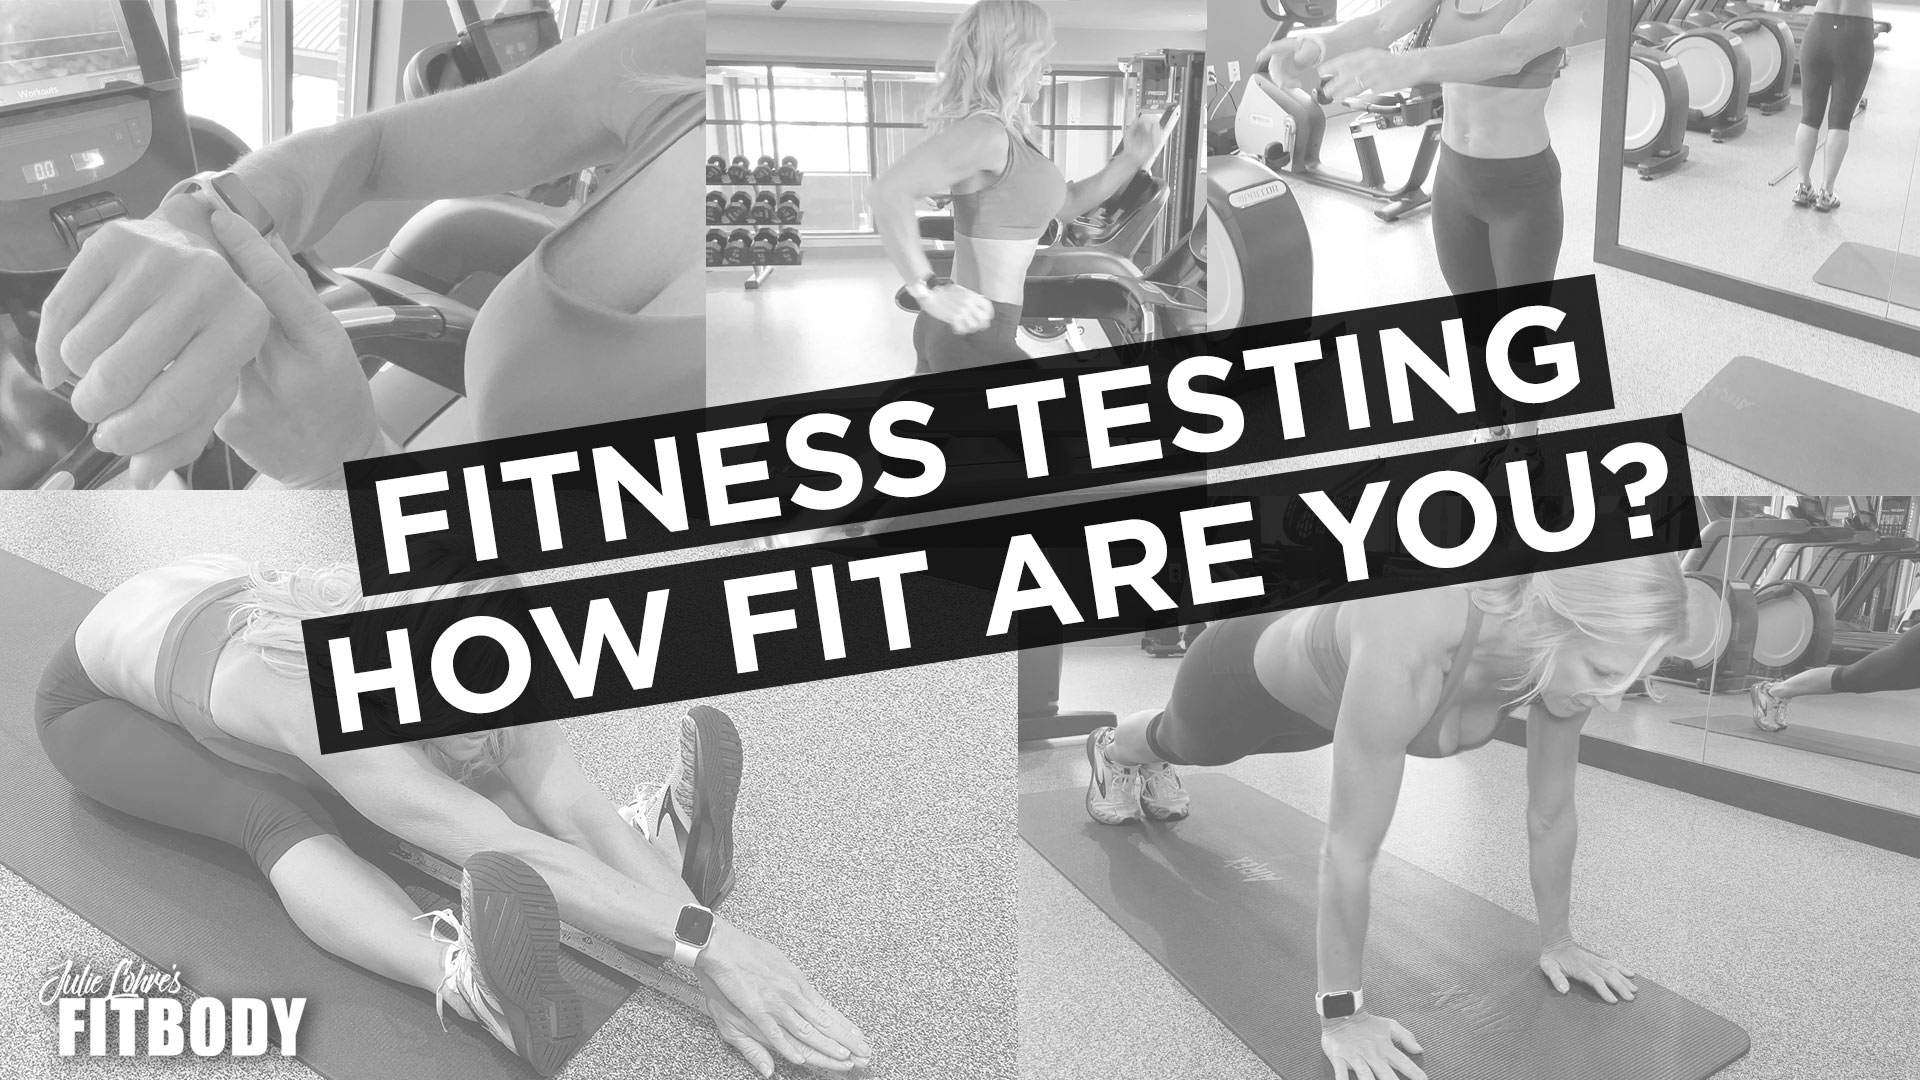 How Fit Are You - Test Yourself with this Online Fitness Test